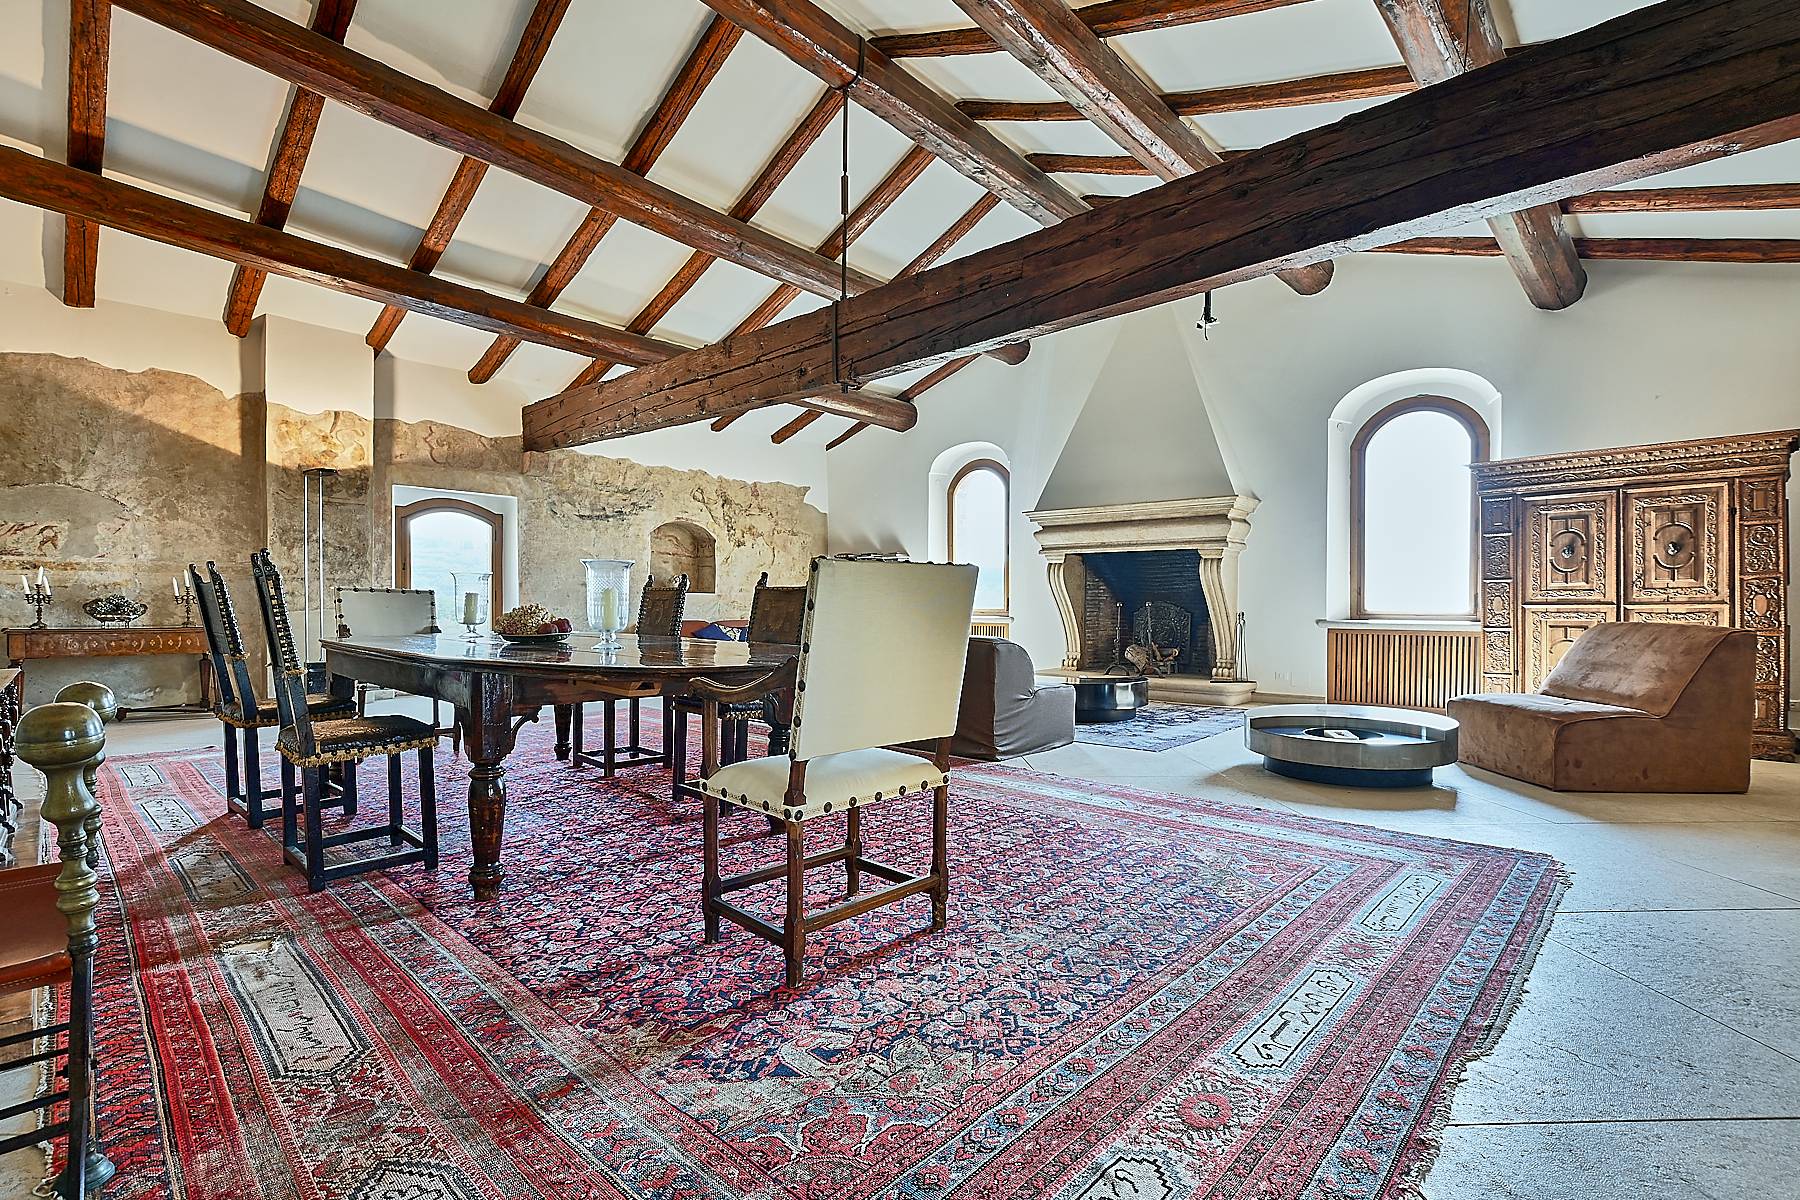 15th century frescoed villa with magnificent panoramic view over the city